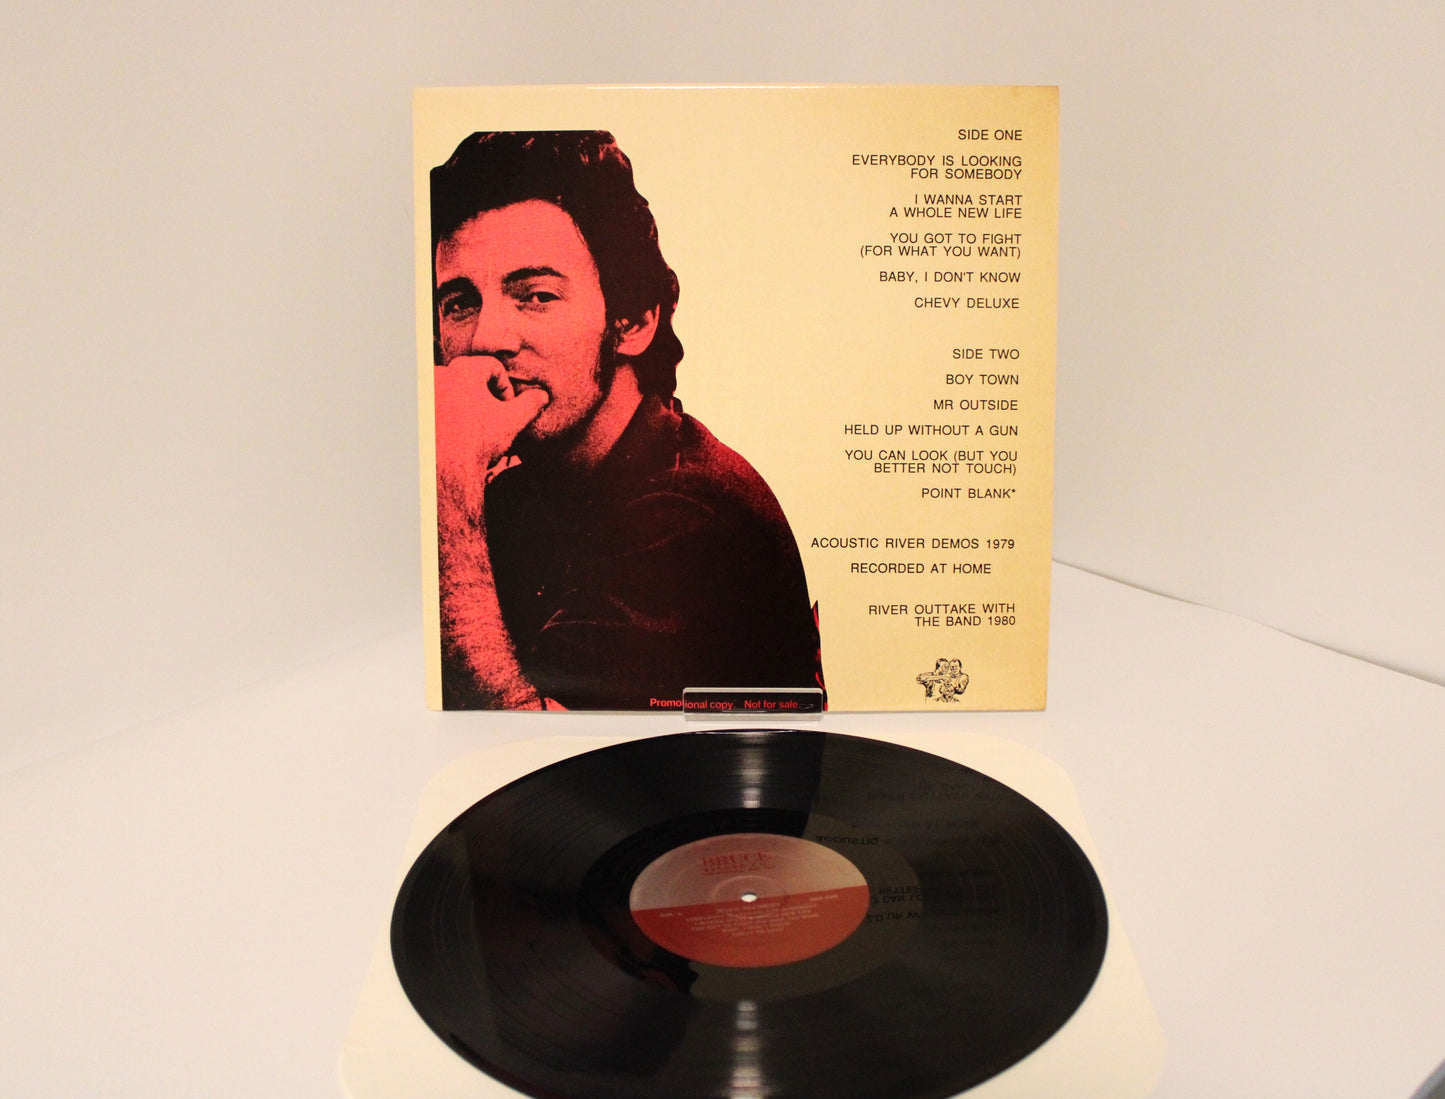 Bruce Springsteen - River Refinery - Bootleg recording at home and outtakes with the band 1980